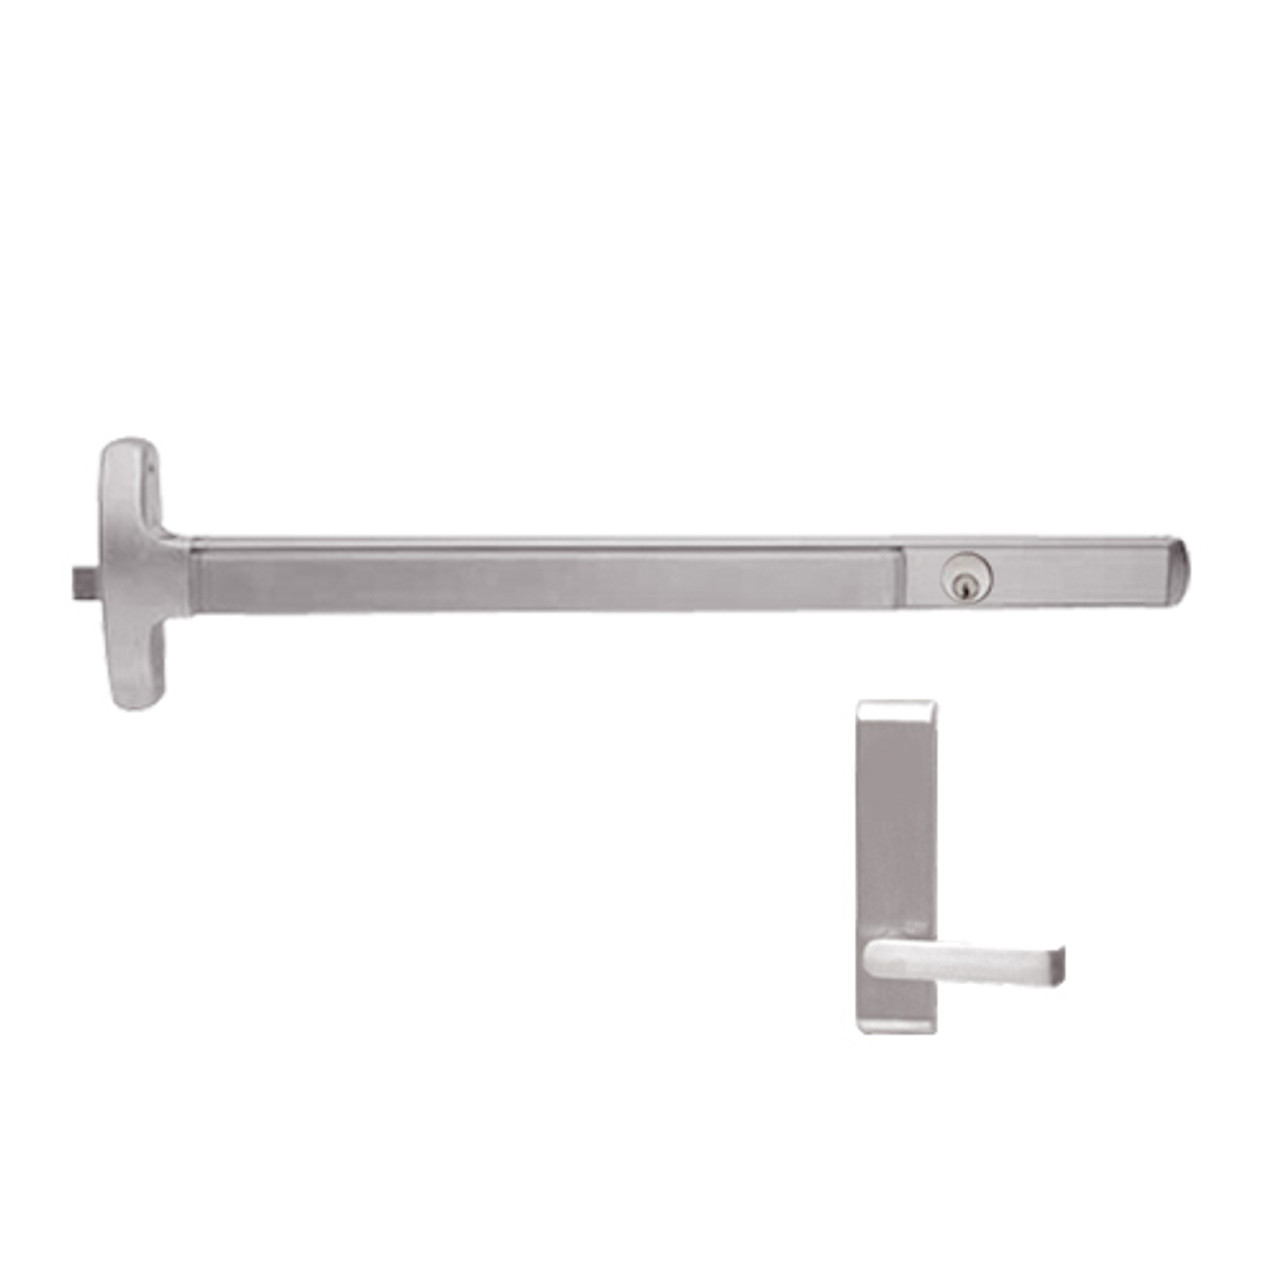 CD24-R-L-BE-DANE-US28-4-LHR Falcon Exit Device in Anodized Aluminum